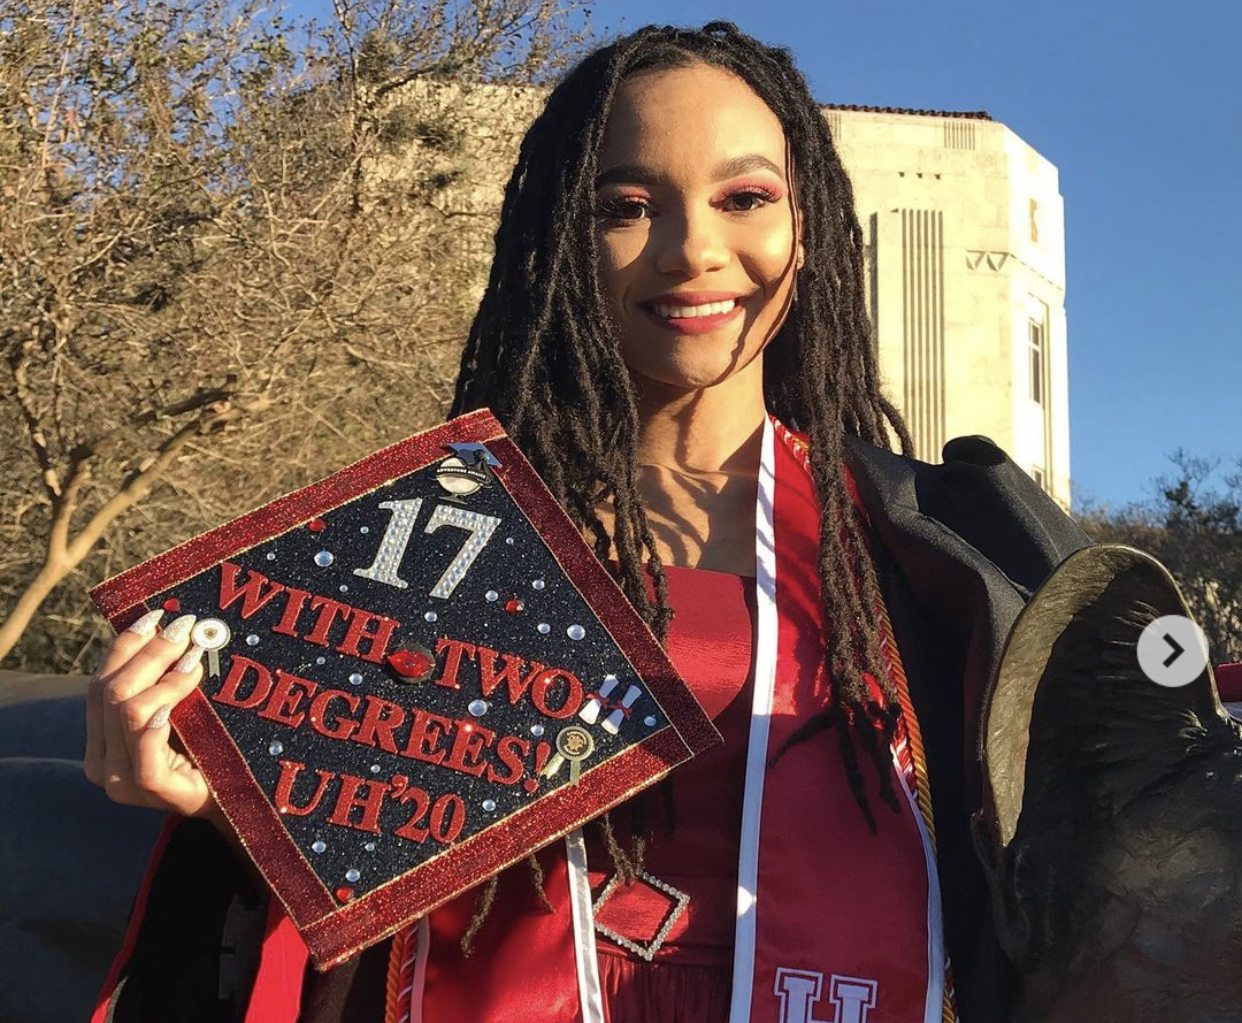 Salenah Cartier Makes History as the Youngest 2020 Graduate From University of Houston